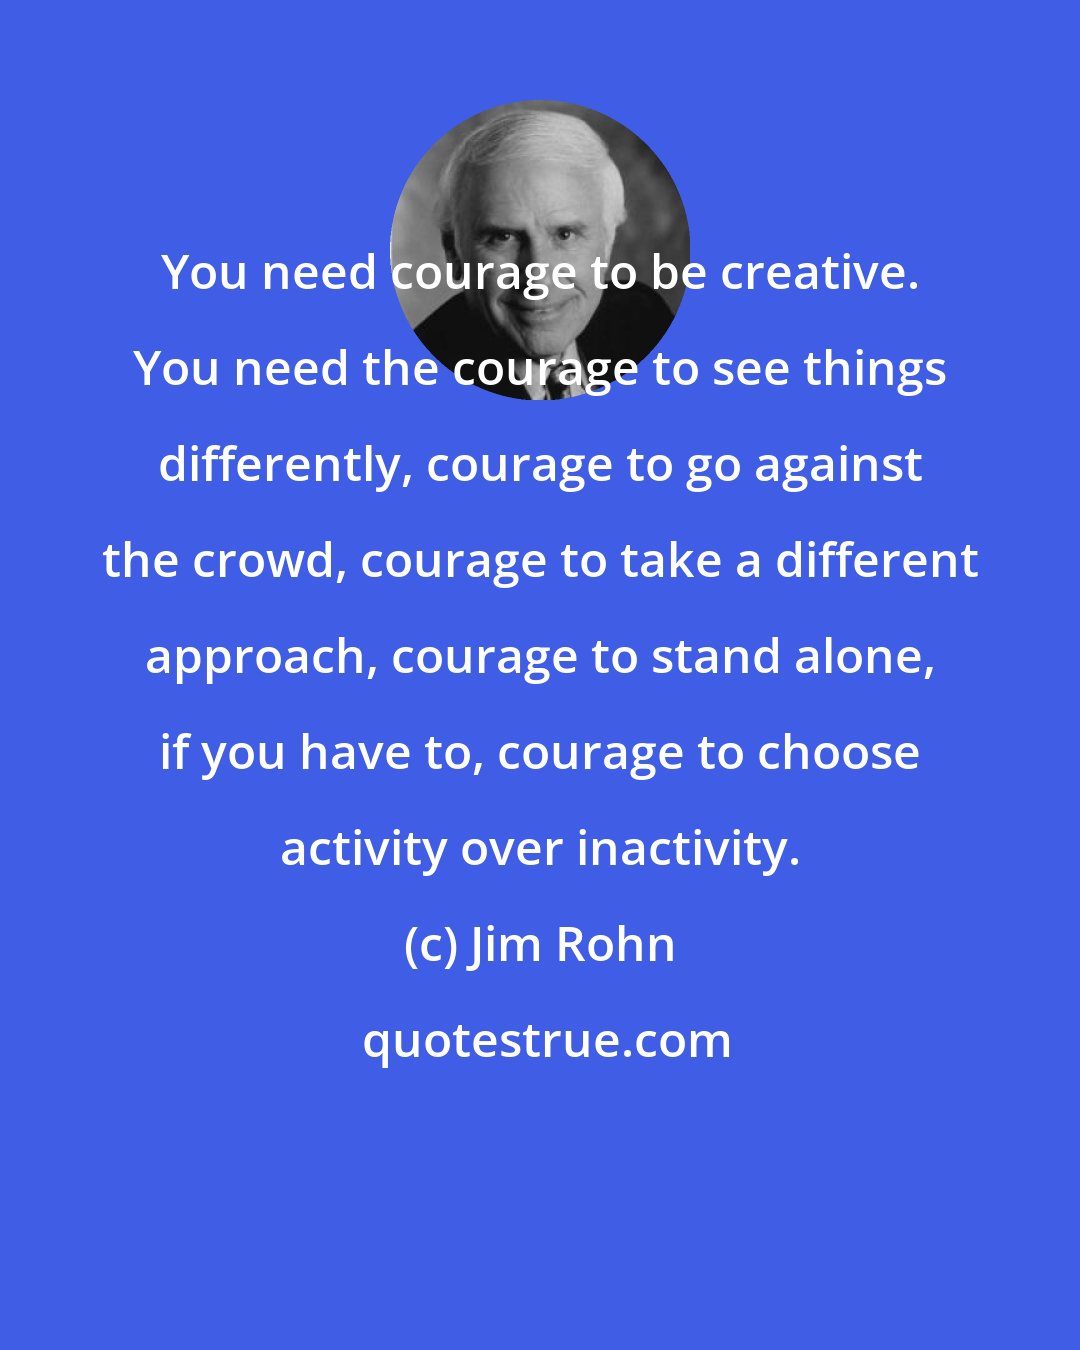 Jim Rohn: You need courage to be creative. You need the courage to see things differently, courage to go against the crowd, courage to take a different approach, courage to stand alone, if you have to, courage to choose activity over inactivity.